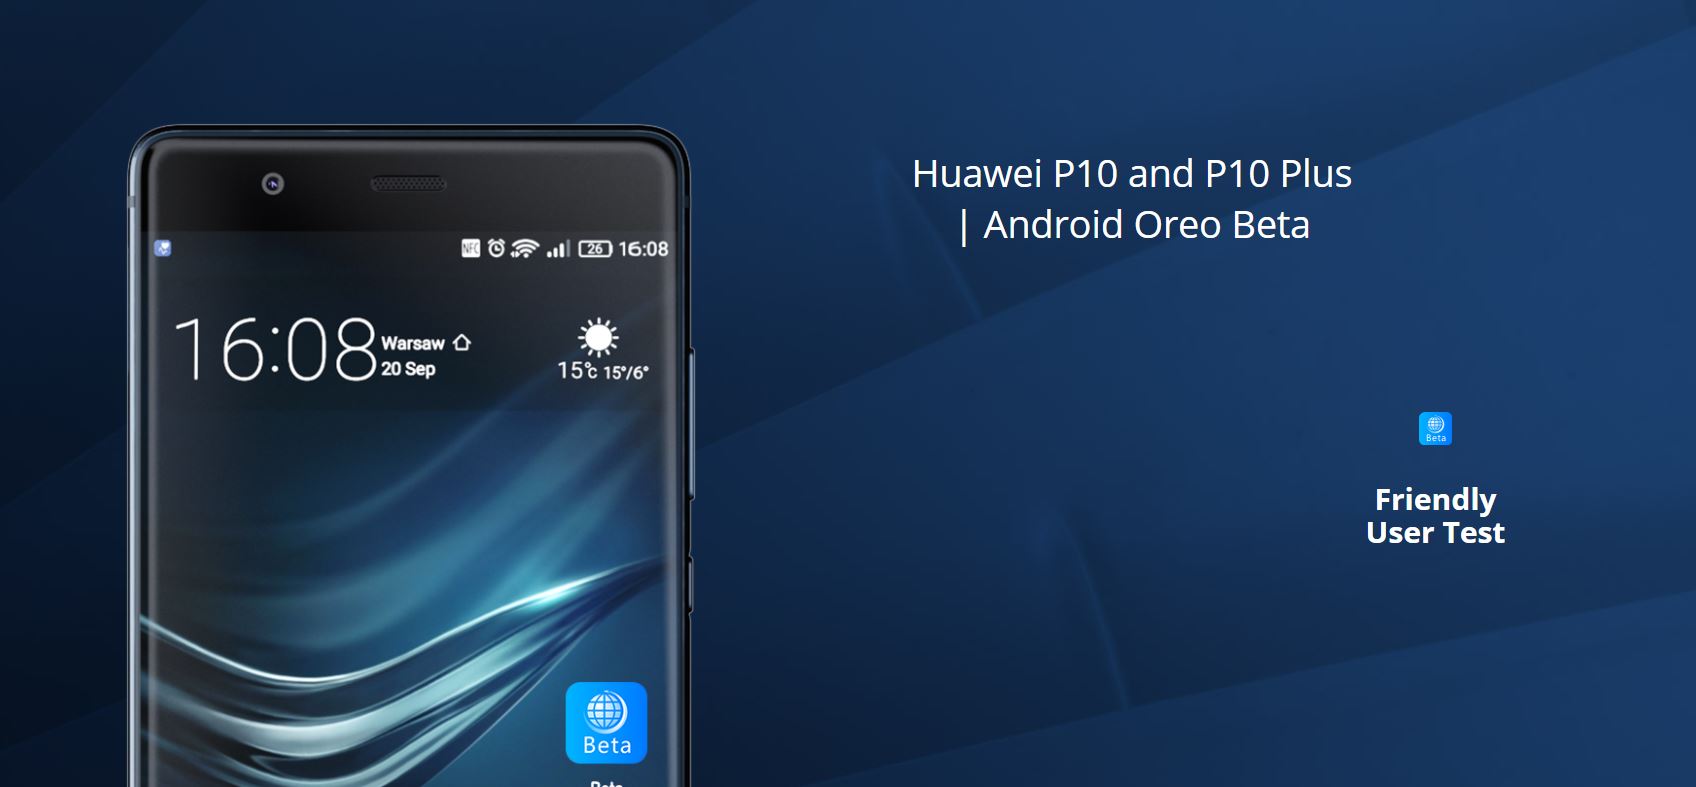 Android Oreo Beta for Huawei P10 and P10 Plus is live now 2